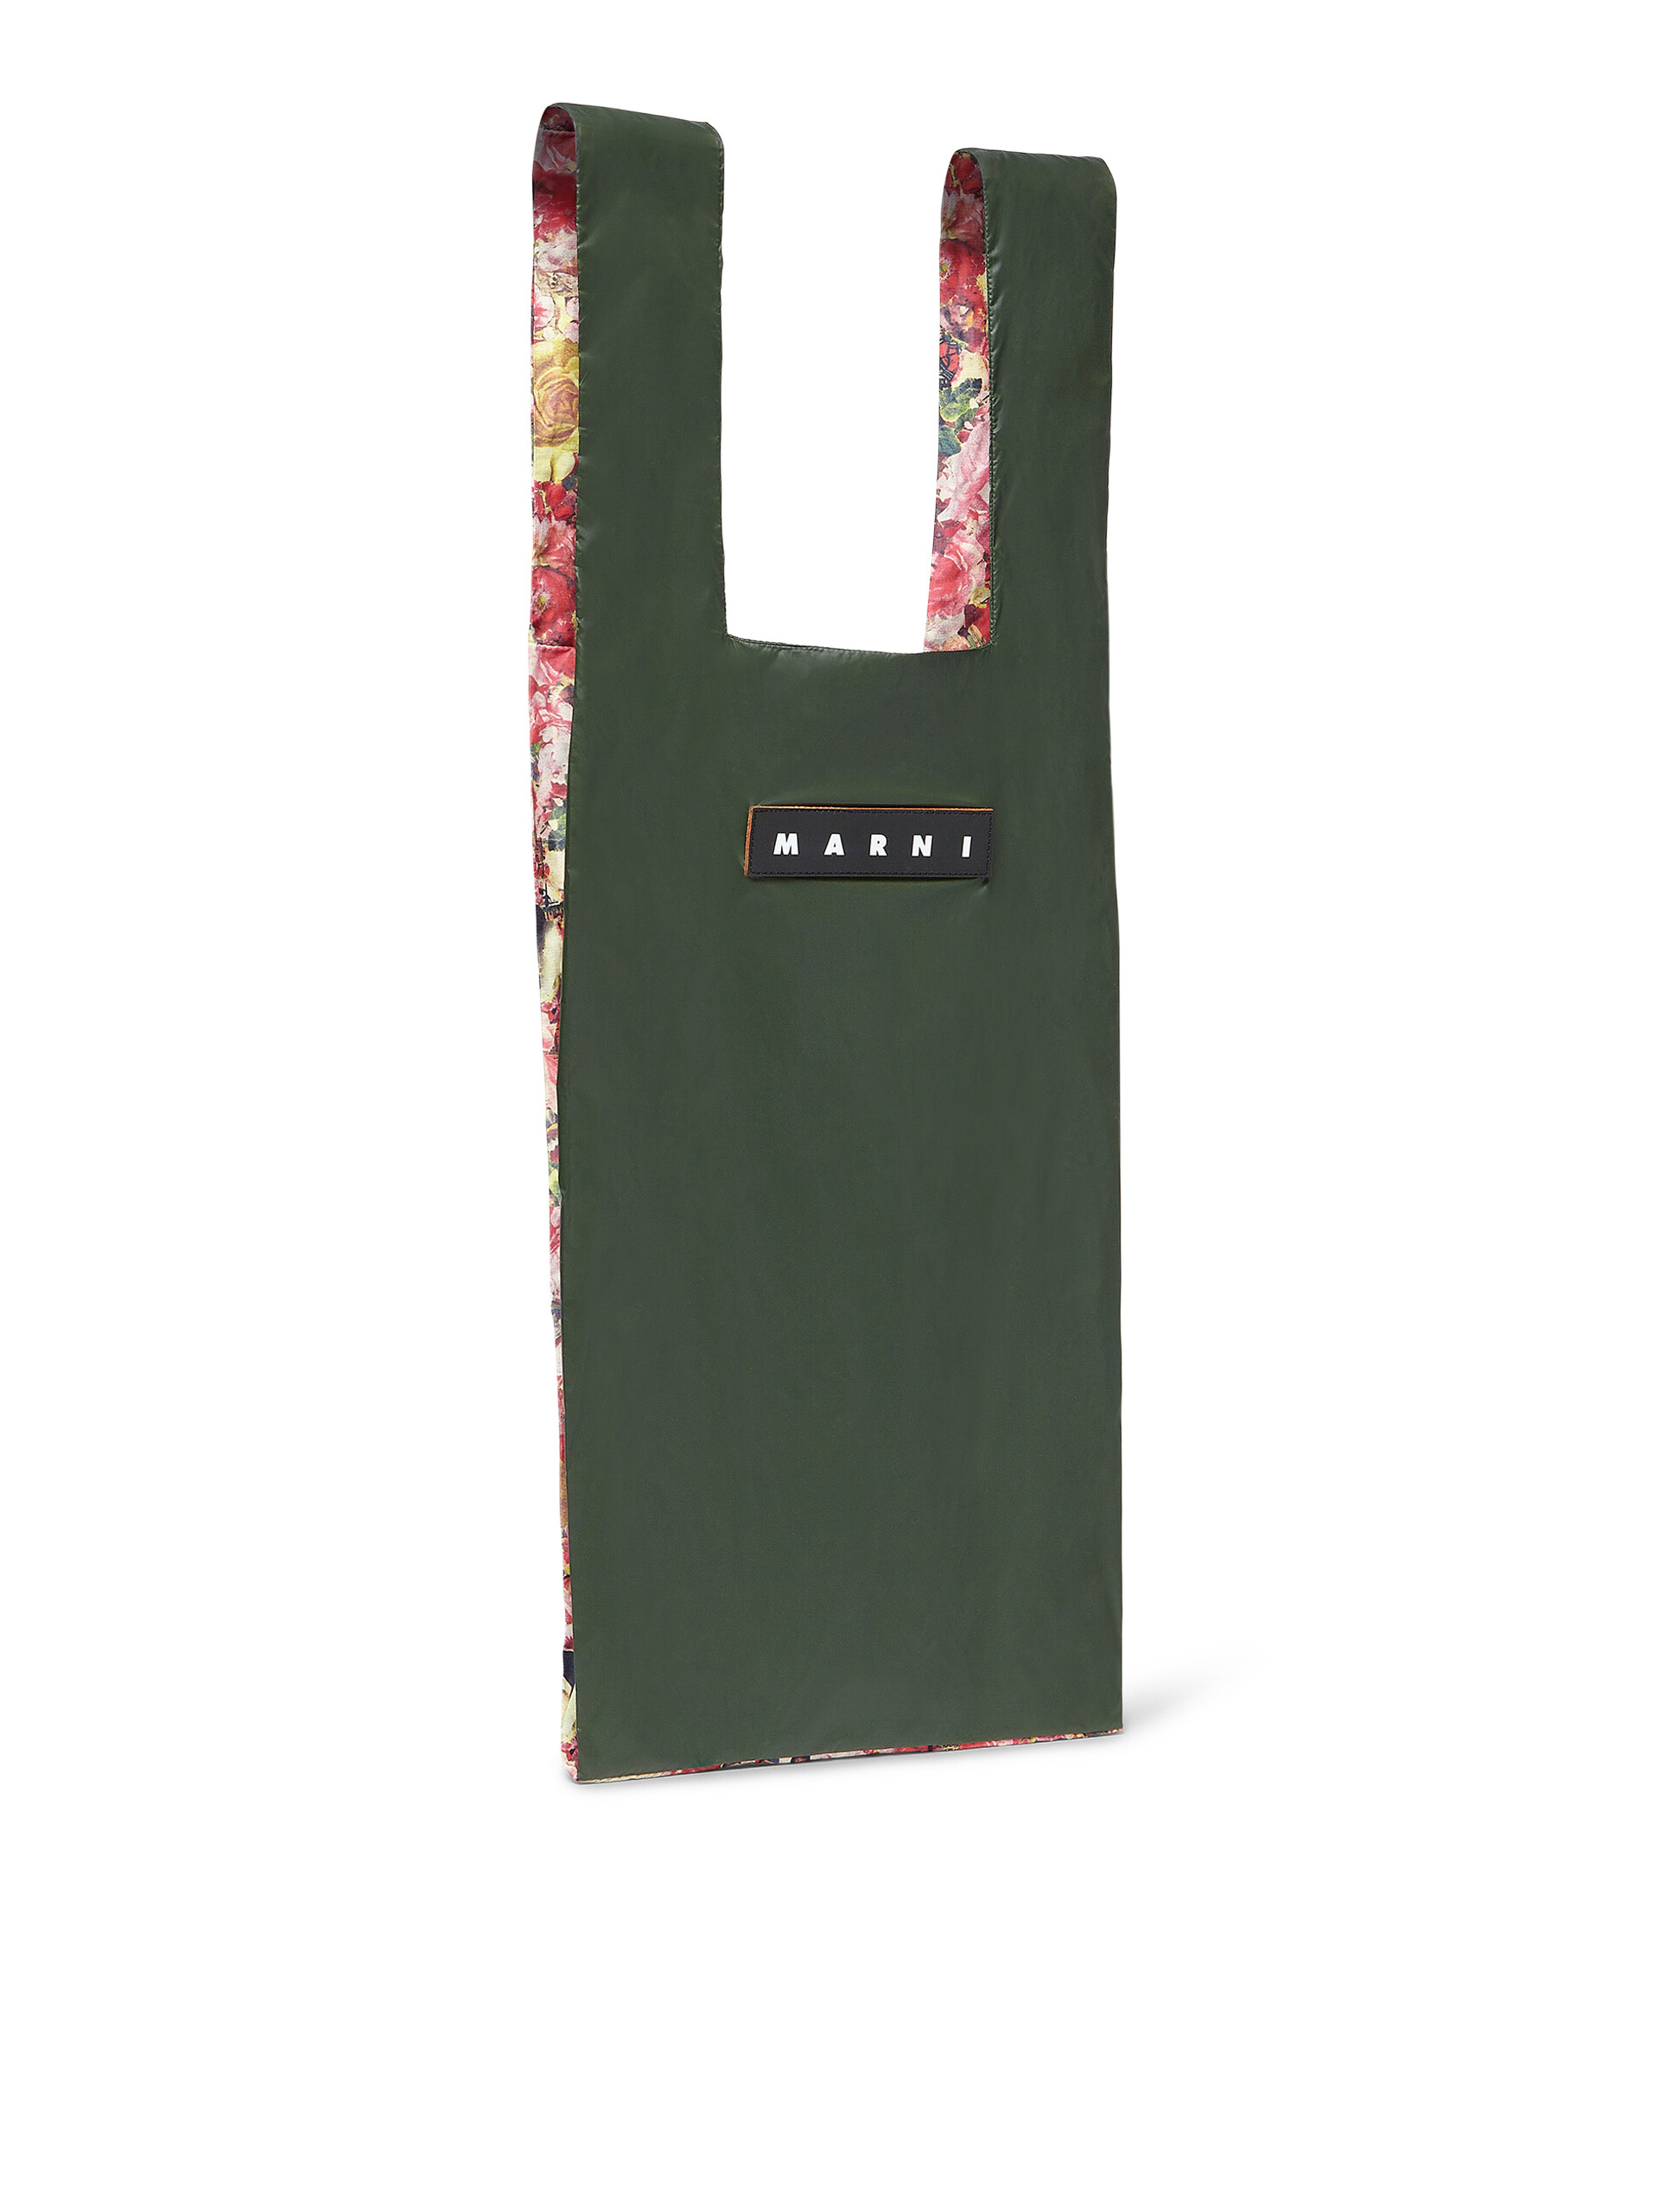 MARNI MARKET green shopping bag with floral print - Bags - Image 2